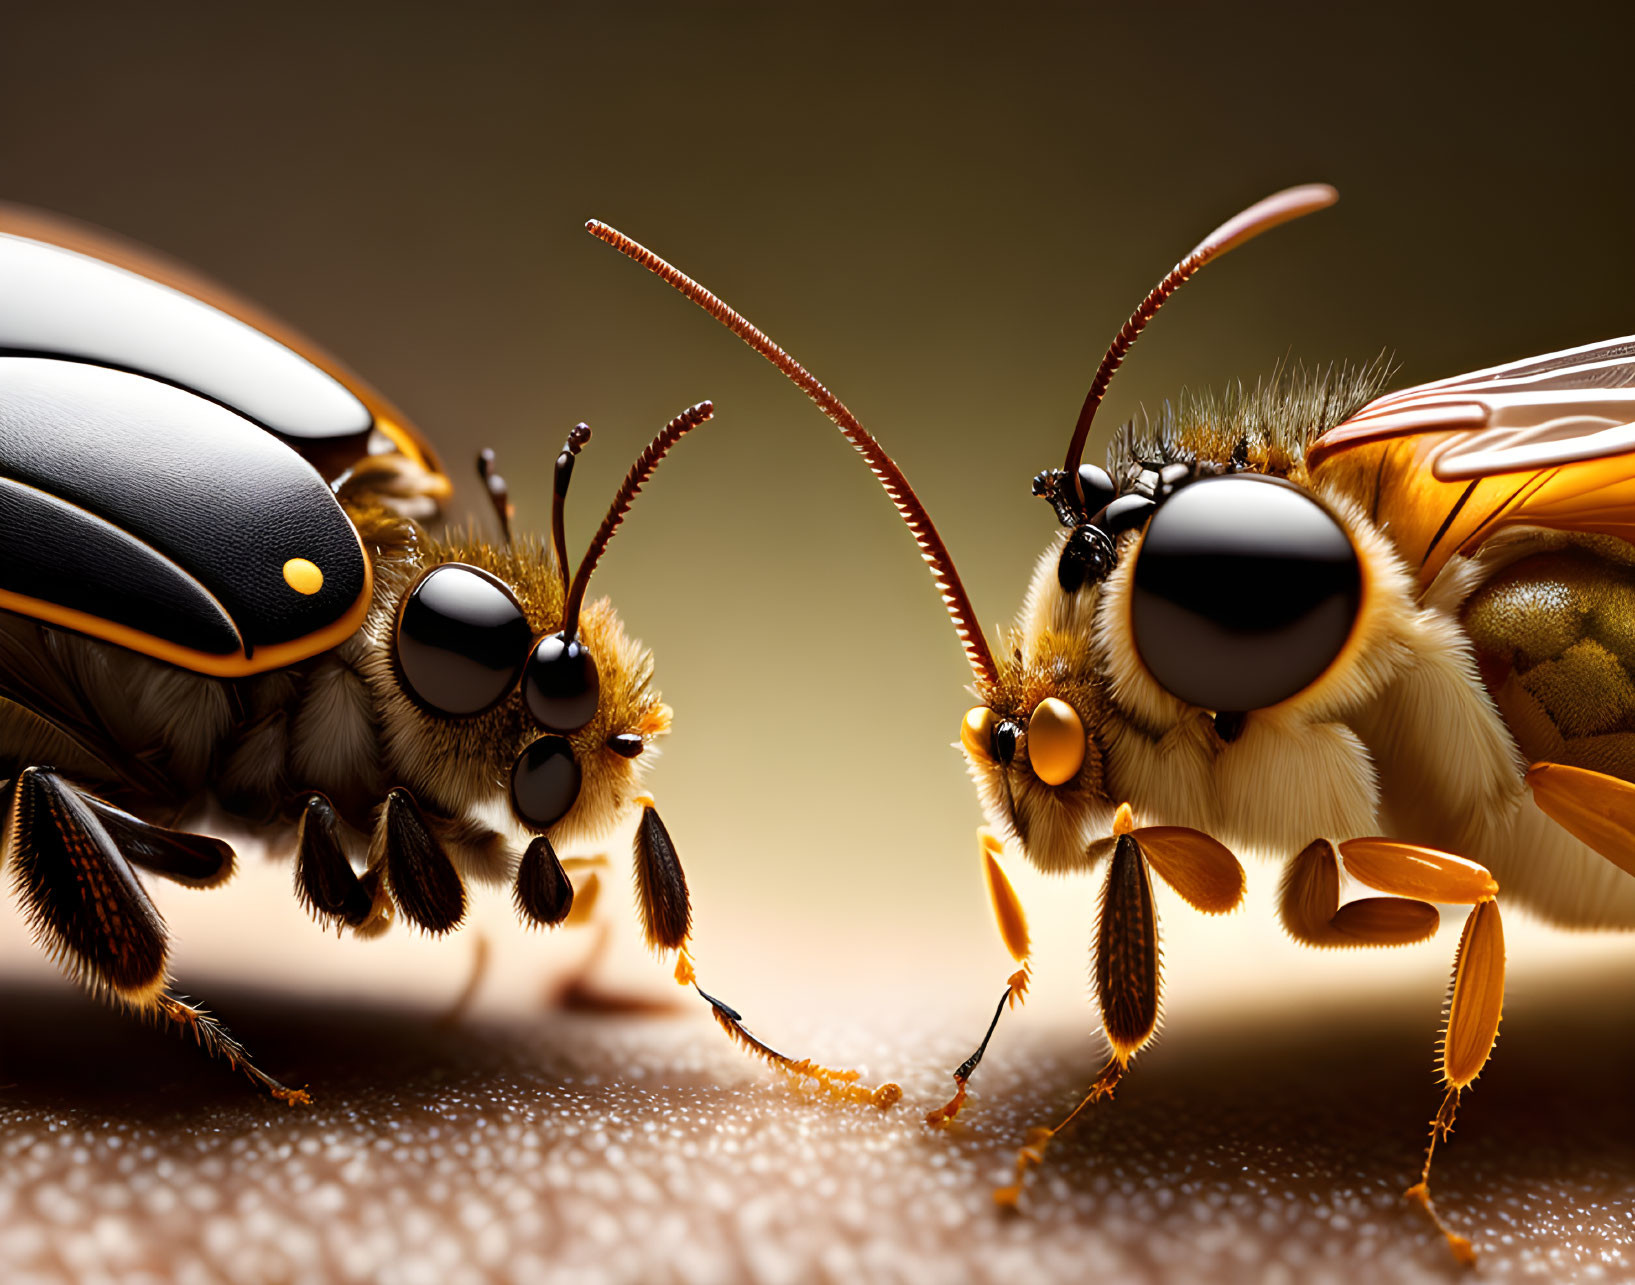 Detailed Close-Up of Vivid Insects with Prominent Eyes and Antennae